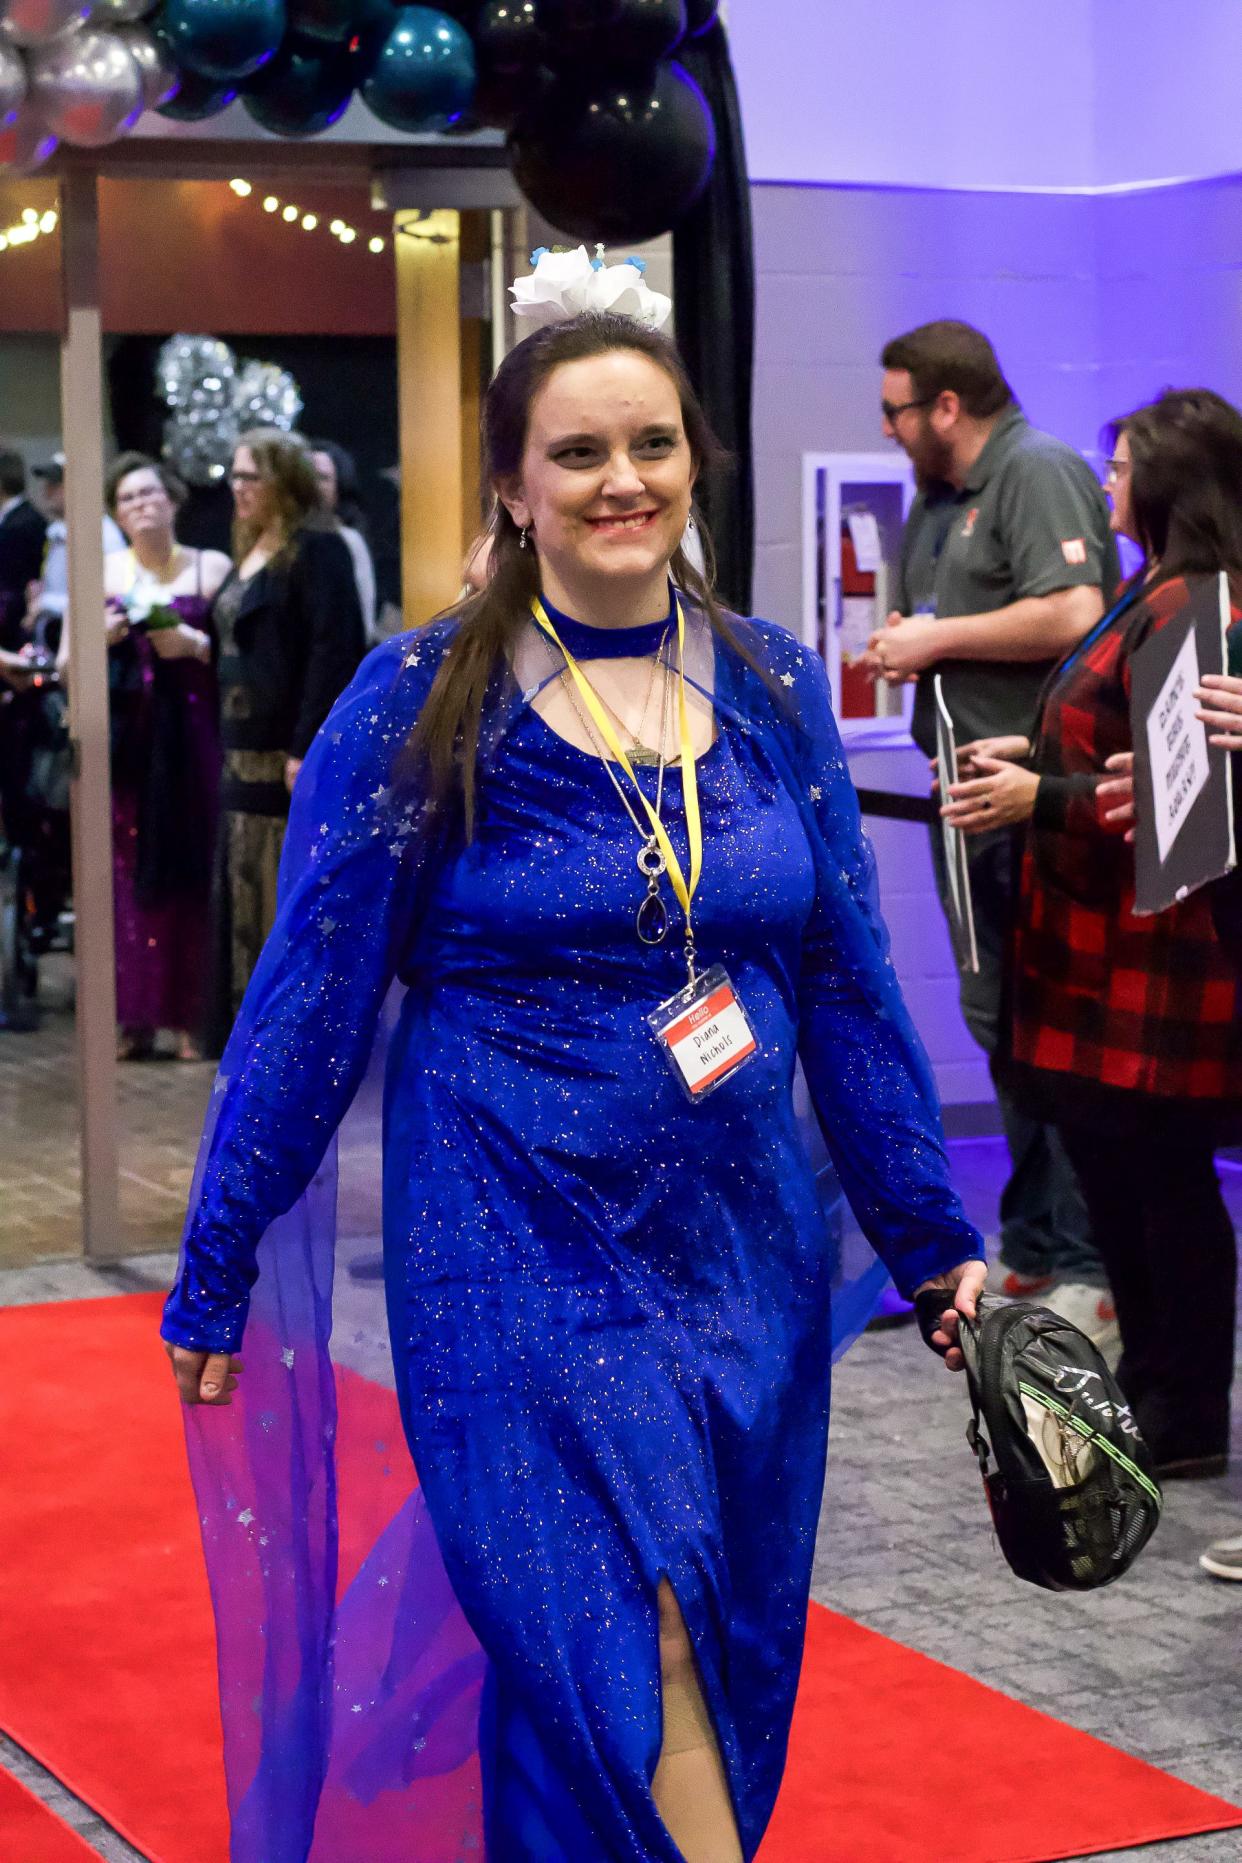 Diana Nichols arrives at Night to Shine, in a stunning, deep blue dress.